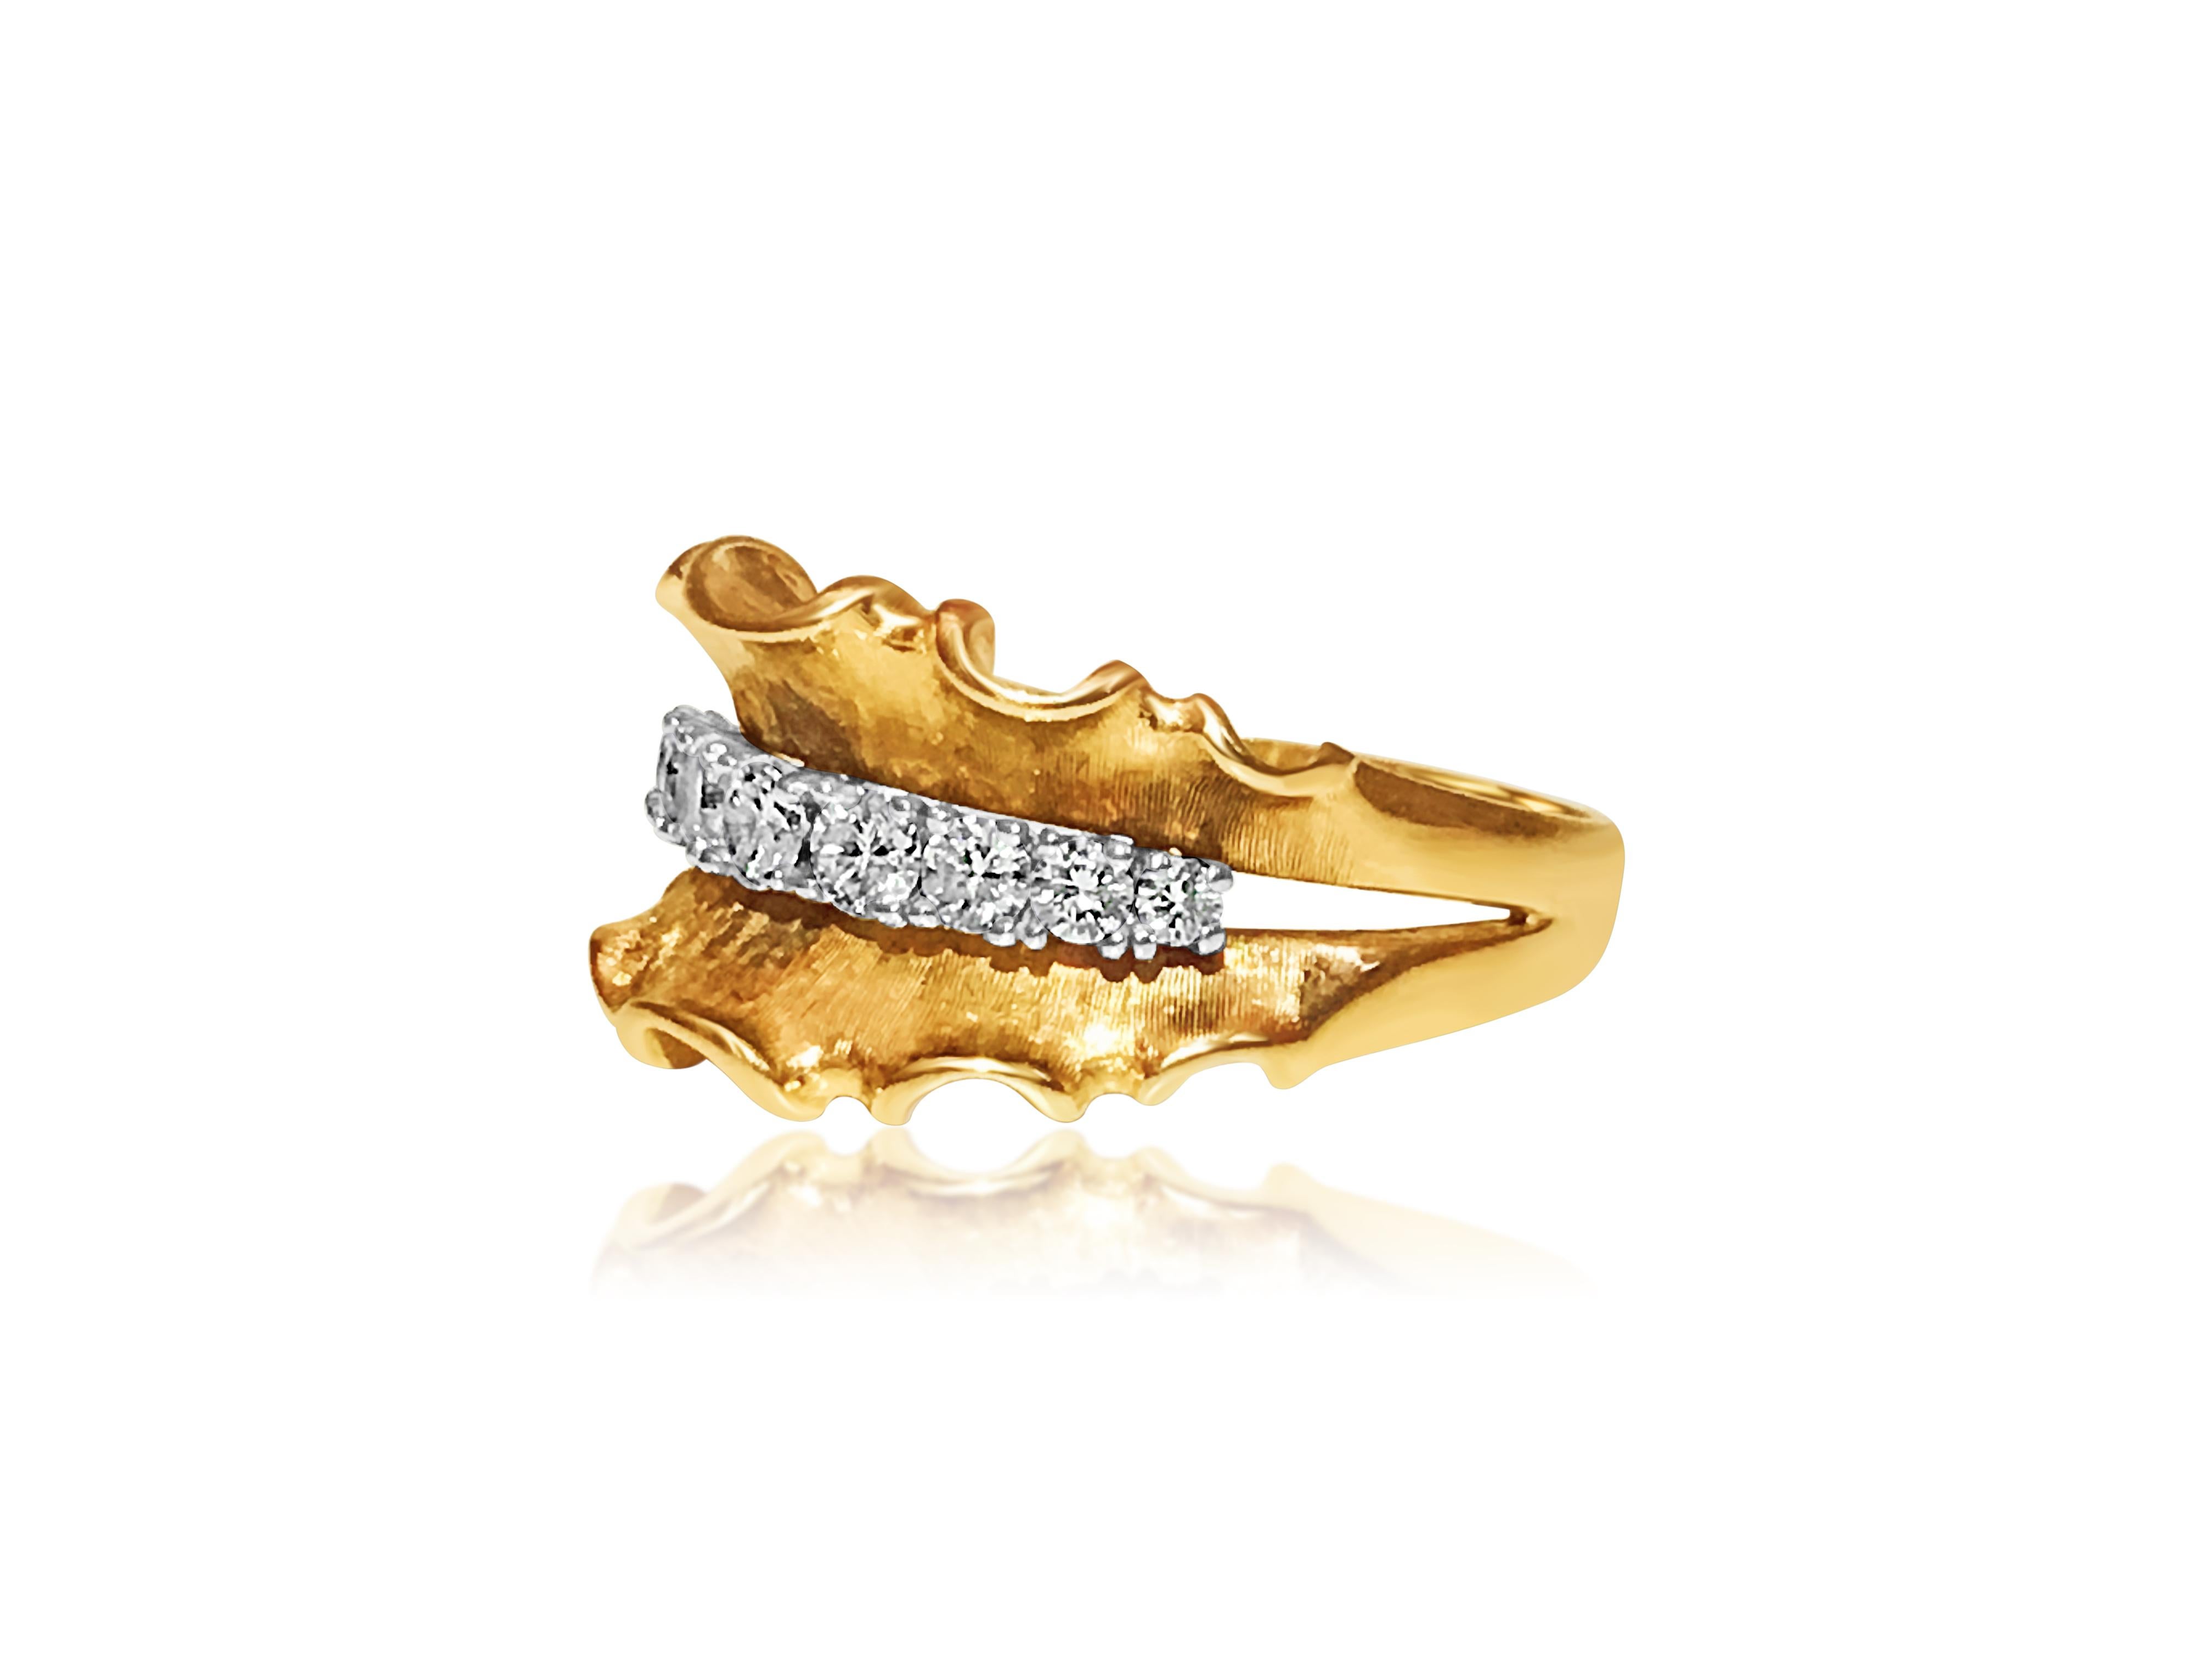 This is a lovely 14-karat yellow gold piece with 9 diamonds totaling 1.10 carats. The diamonds are high quality, with VS clarity and F color, and they sparkle beautifully. The setting is done with prongs, and the entire piece weighs 5.66